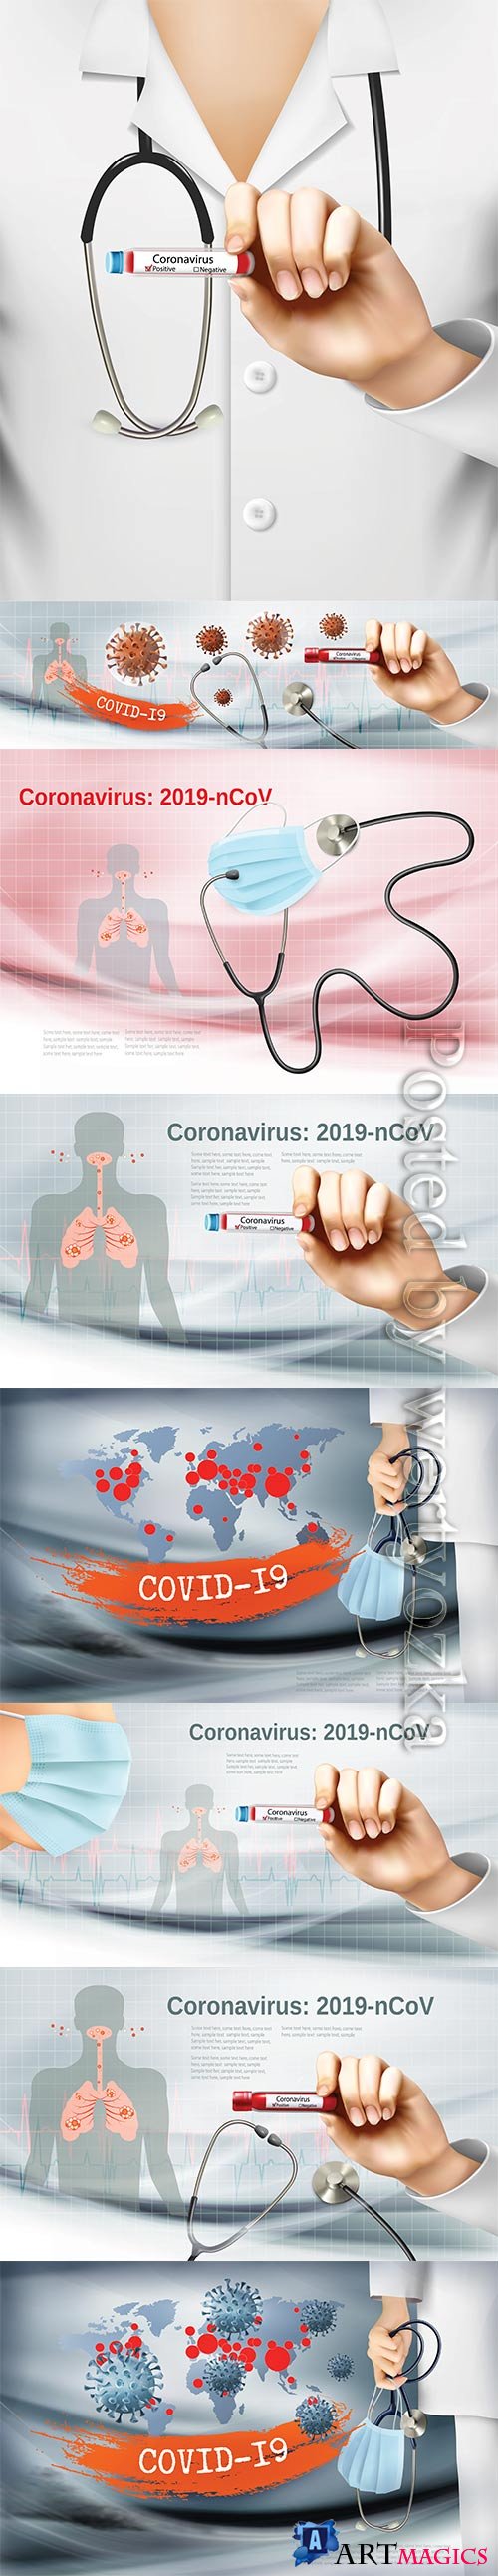 Coranavirus background with doctor holding tube with pasitiv test and stethoscope